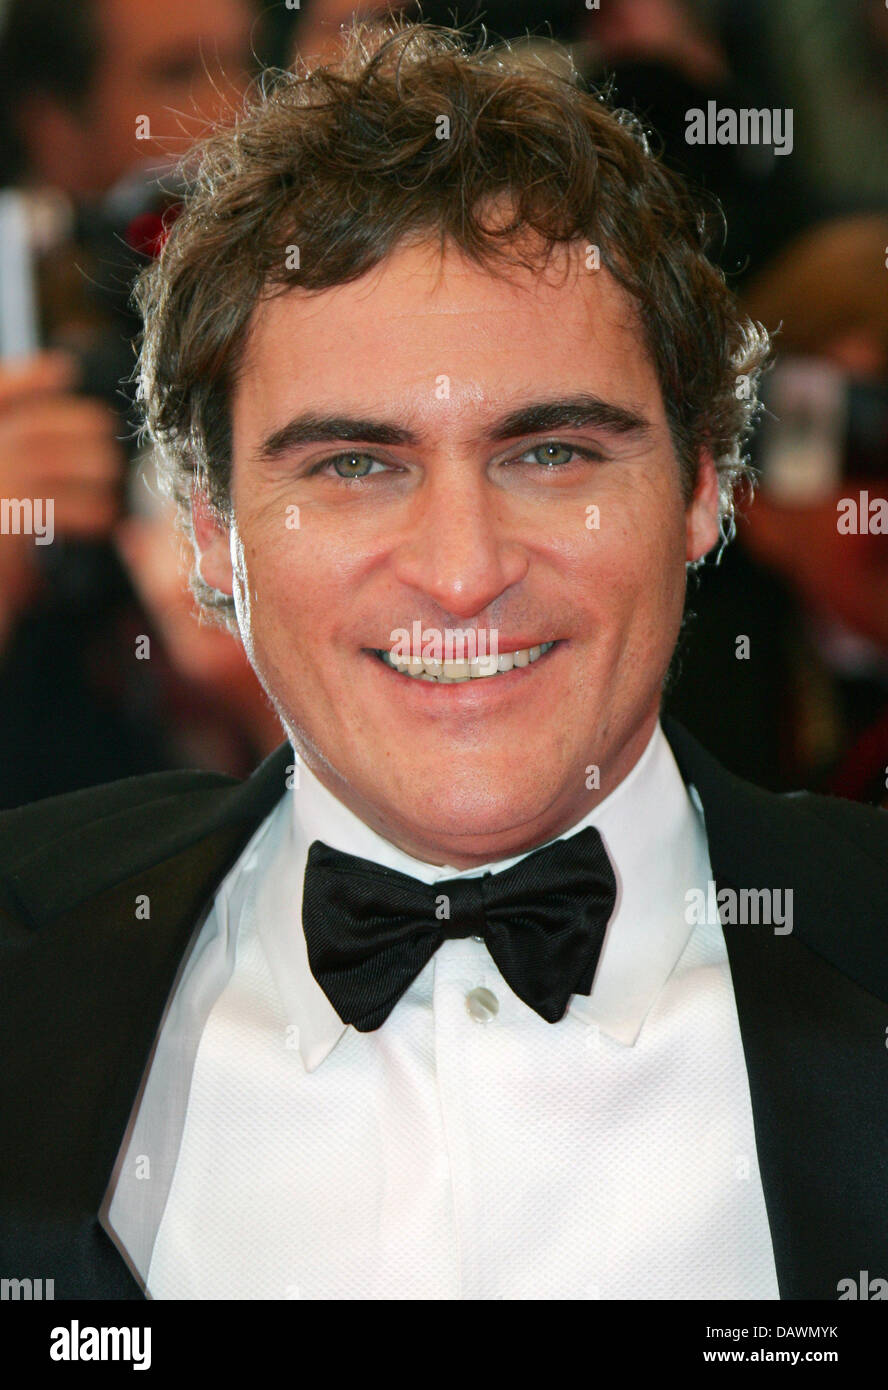 US actor Joaquin Phoenix smiles for the cameras as he arrives to the premiere of the film 'We Own The Night' at the 60th Cannes Film Festival in Cannes, France, 25 May 2007. Photo: Hubert Boesl Stock Photo